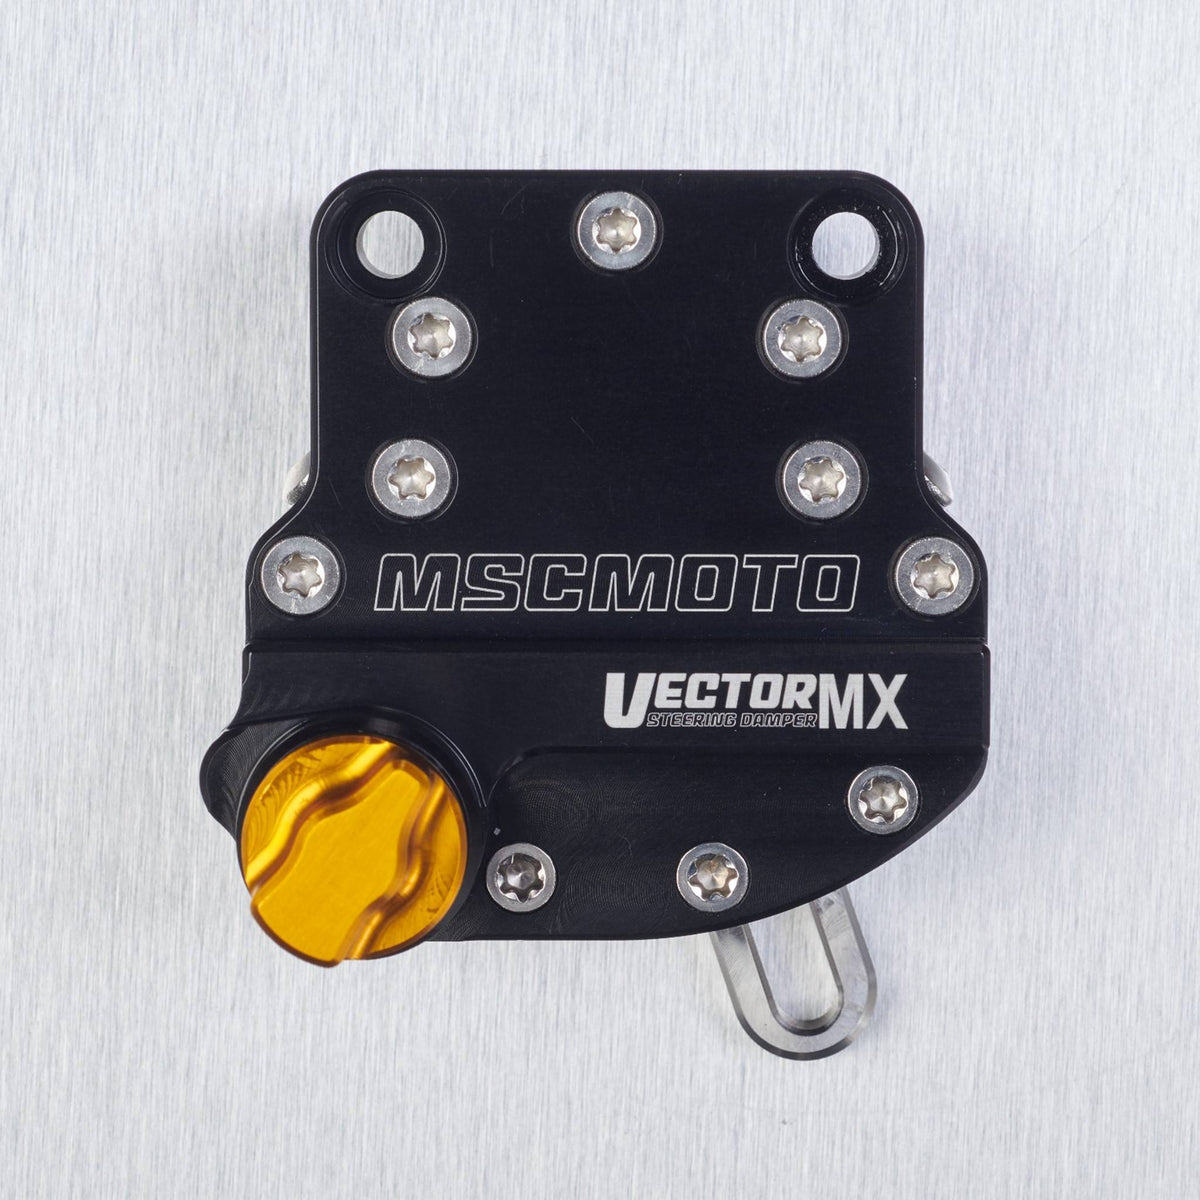 mscmotousa, VectorMX Steering Damper Kit &quot;Down Under&quot; Mount (VEC0001) - GAS GAS (EC, MC) KTM (EXC, SXF) HUSQVARNA (TC, TE, FC, FE) HUSABERG (FE, FX, TE), VEC0001, gas gas, gas-gas-2021-ec-250-esi5912814, husaberg, husaberg-2011-te-125-esi3907738, husqvarna, ktm, vectormx, , Imported and distributed in North &amp; South America by Lindeco Genuine Powersports.